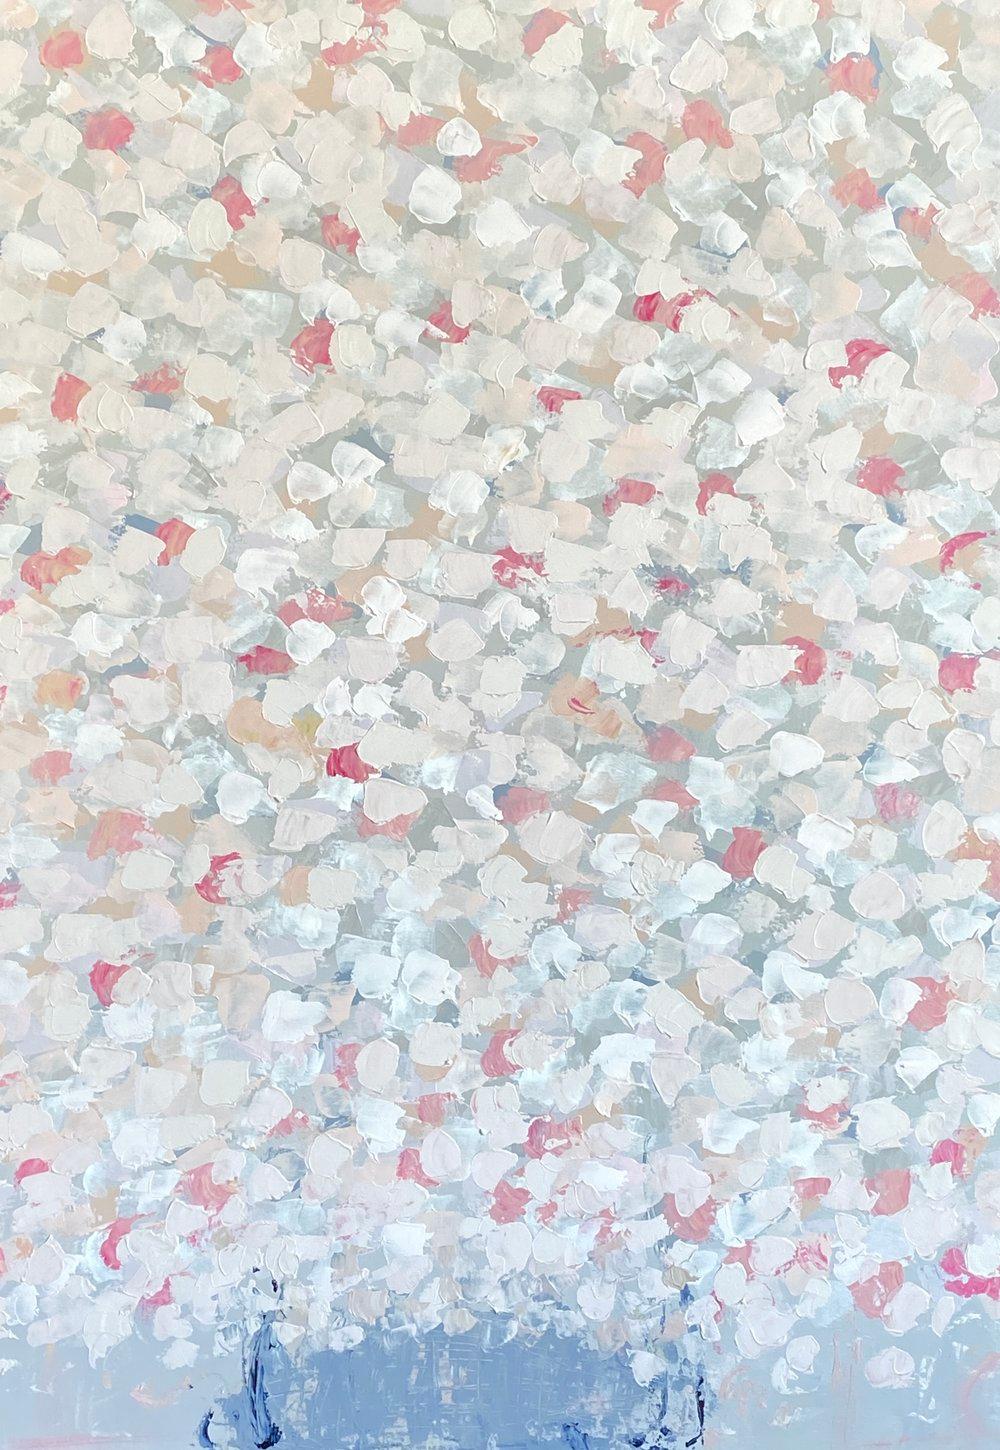 Kim Romero Abstract Painting - Flower Patterns Pink, Abstract Floral Painting, Acrylic on Canvas, Signed